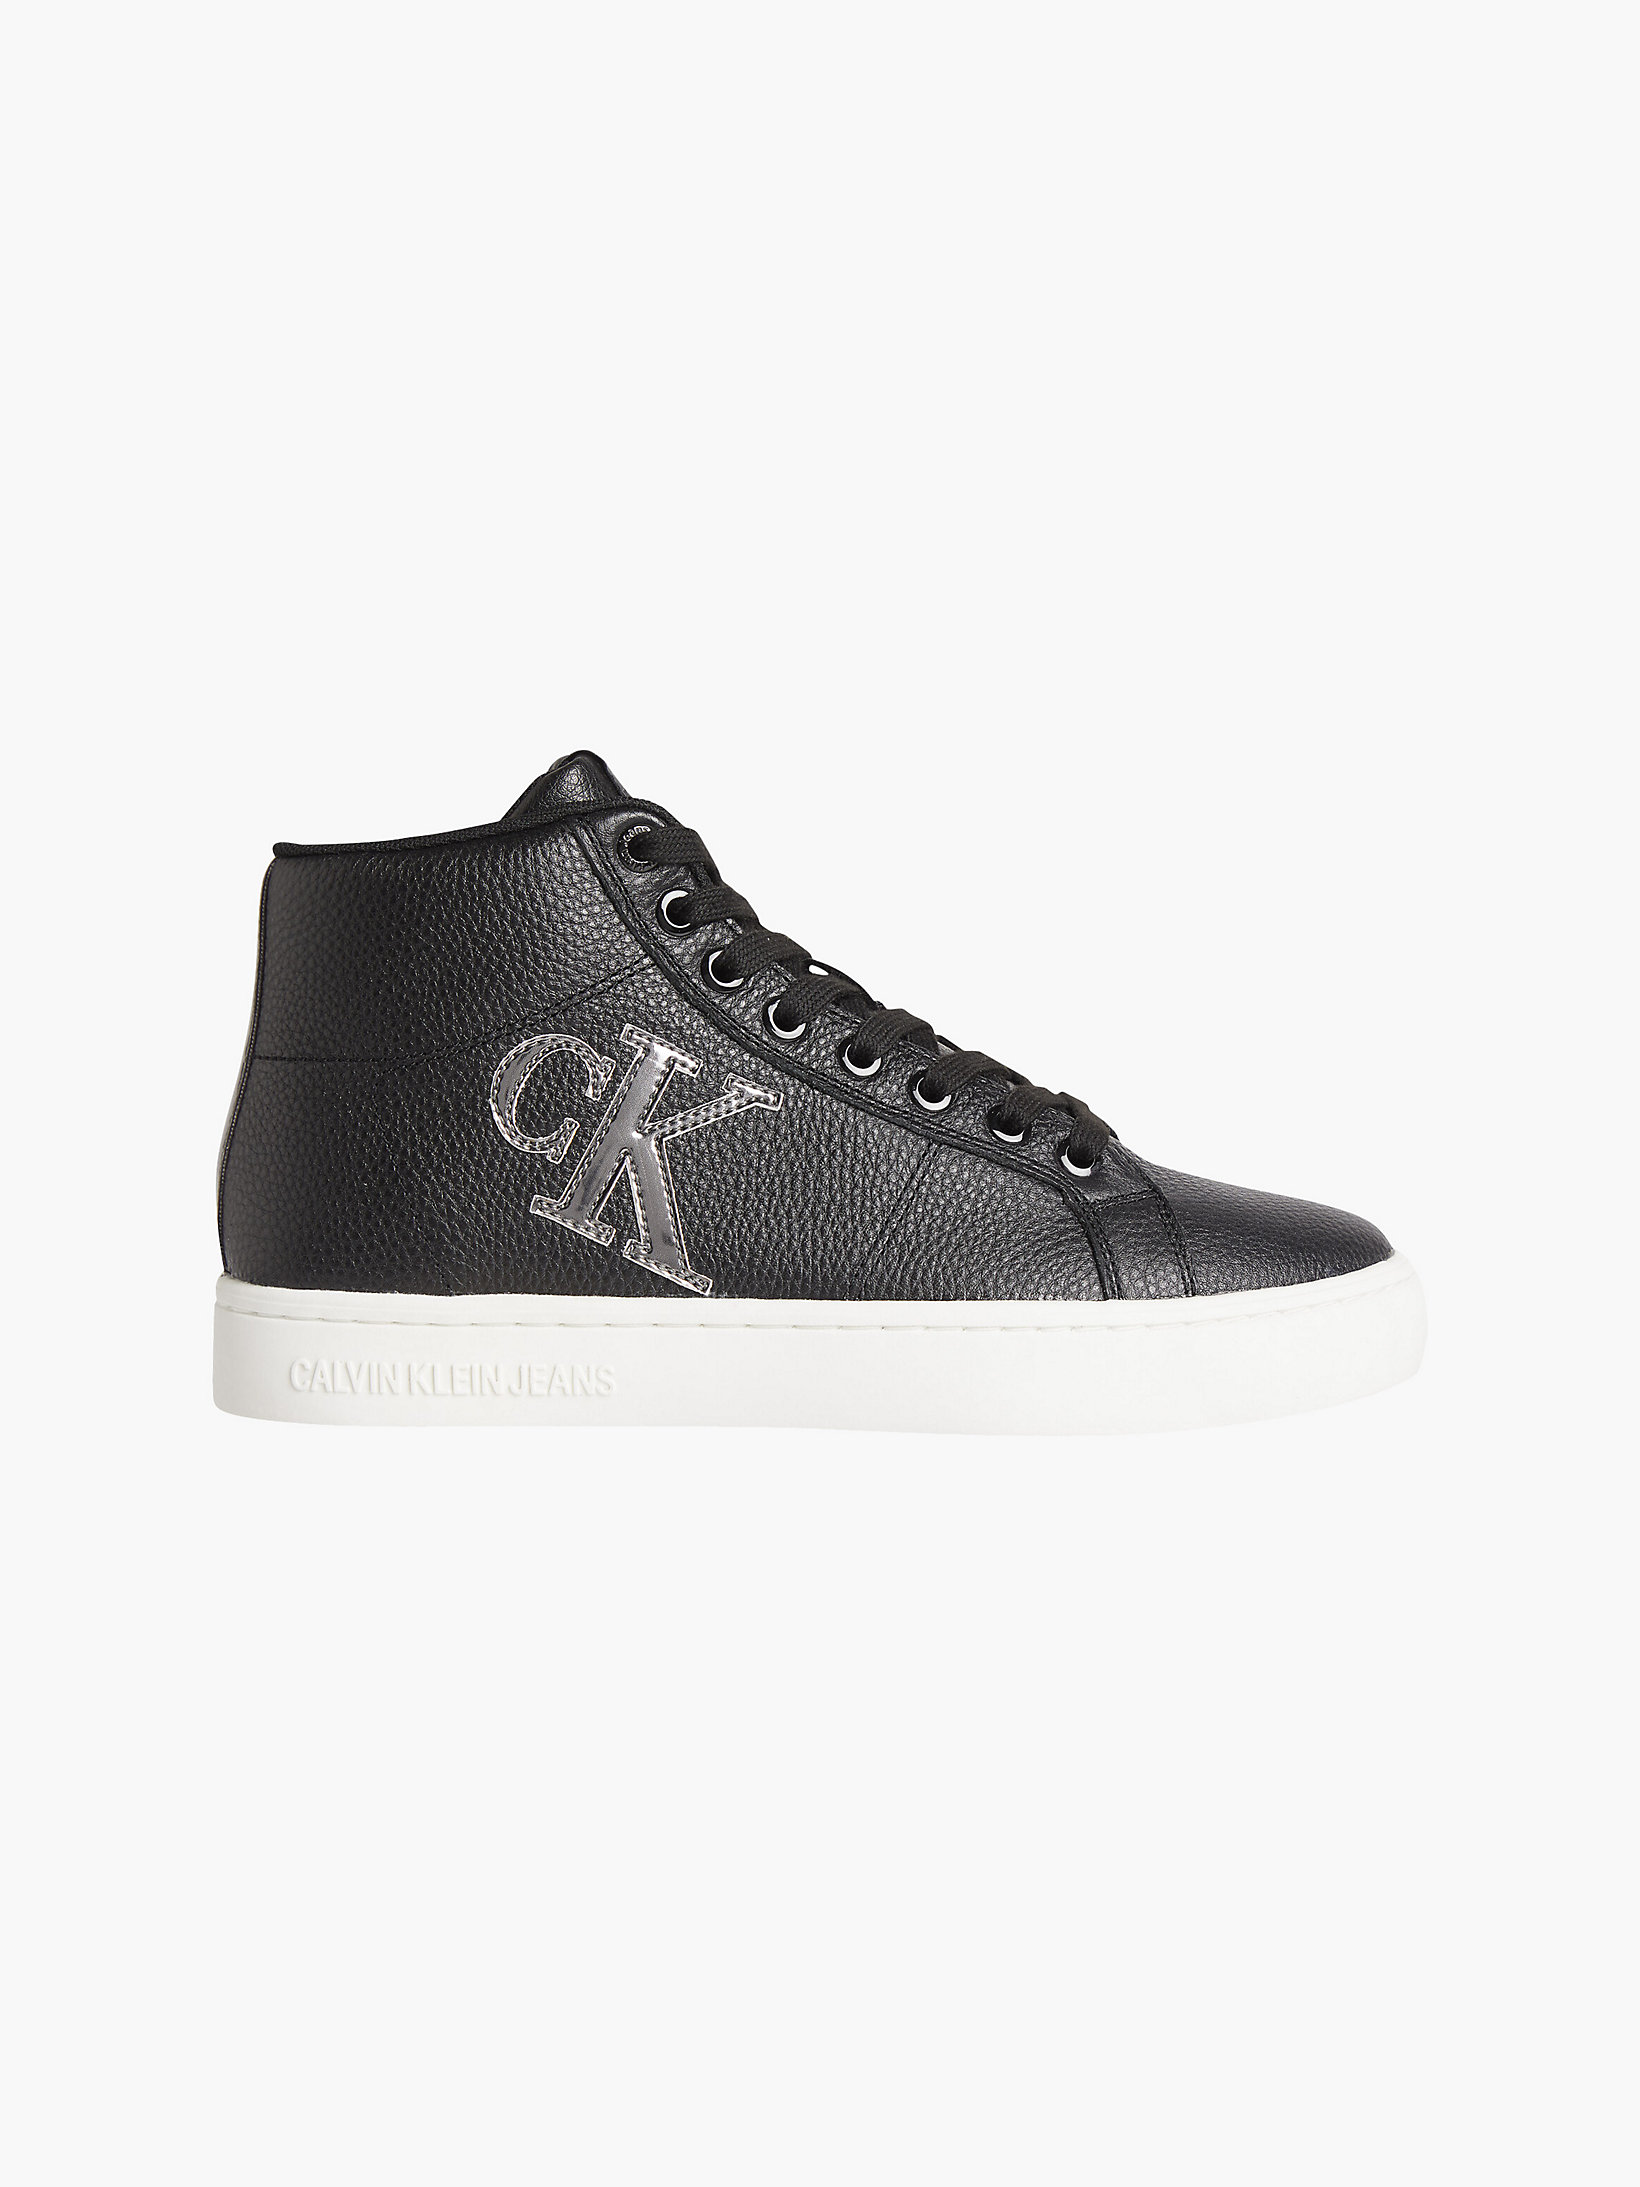 Black / Silver Leather High-Top Trainers undefined women Calvin Klein